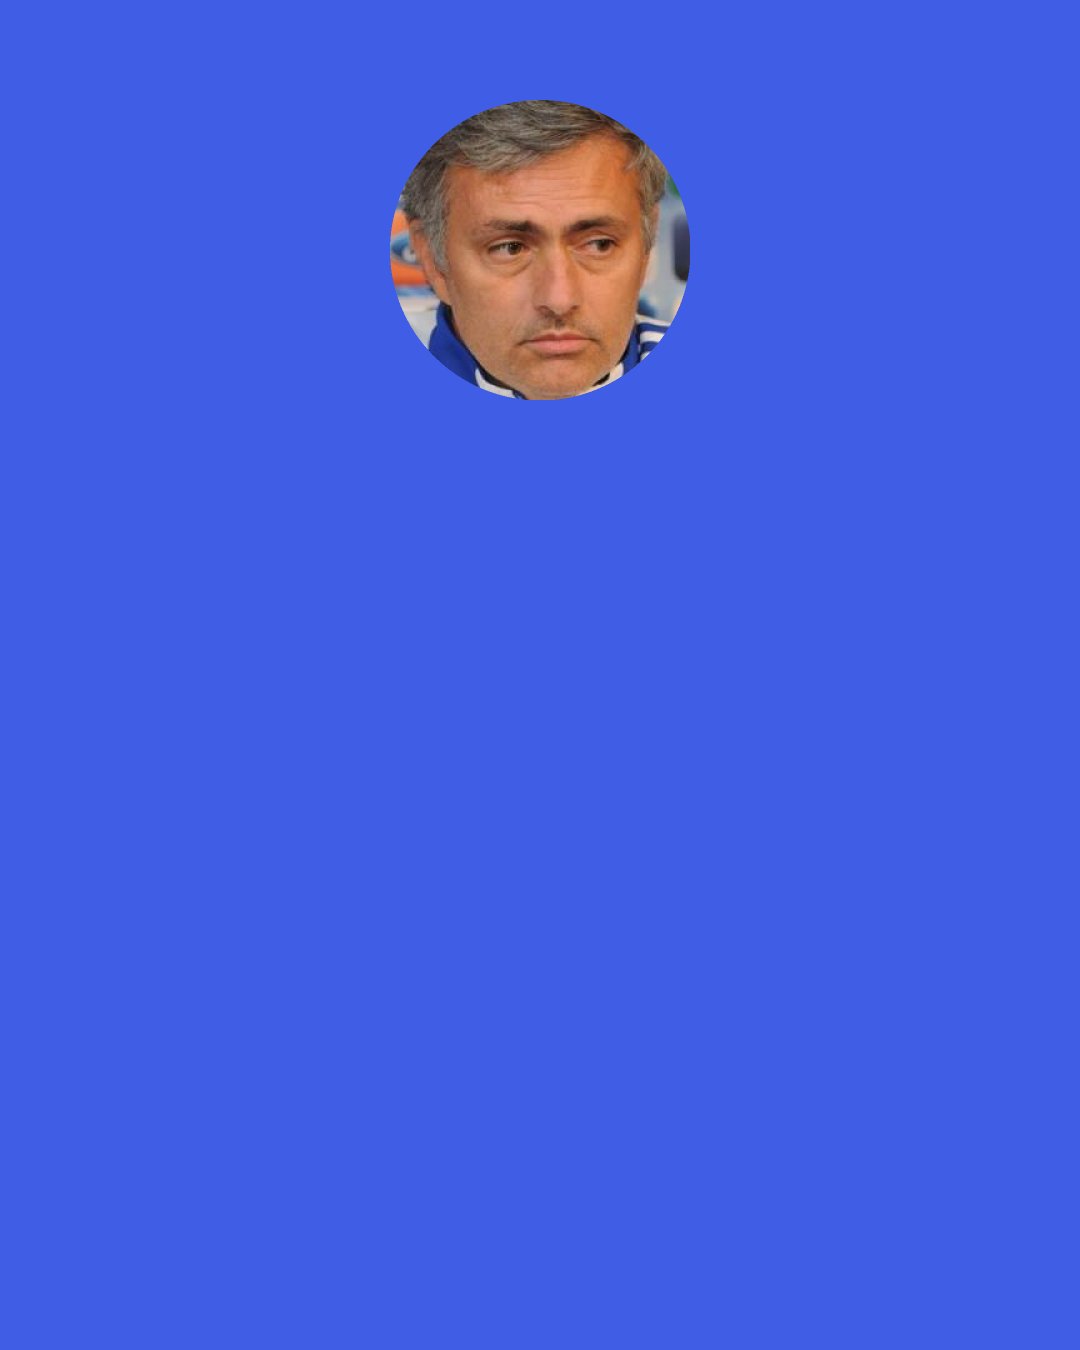 Jose Mourinho: There are only two ways for me to leave Chelsea. One way is in June 2010 when I finish my contract and if the club doesn’t give me a new one. It is the end of my contract and I am out. The second way is for Chelsea to sack me. The way of the manager leaving the club by deciding to walk away, no chance! I will never do this to Chelsea supporters.